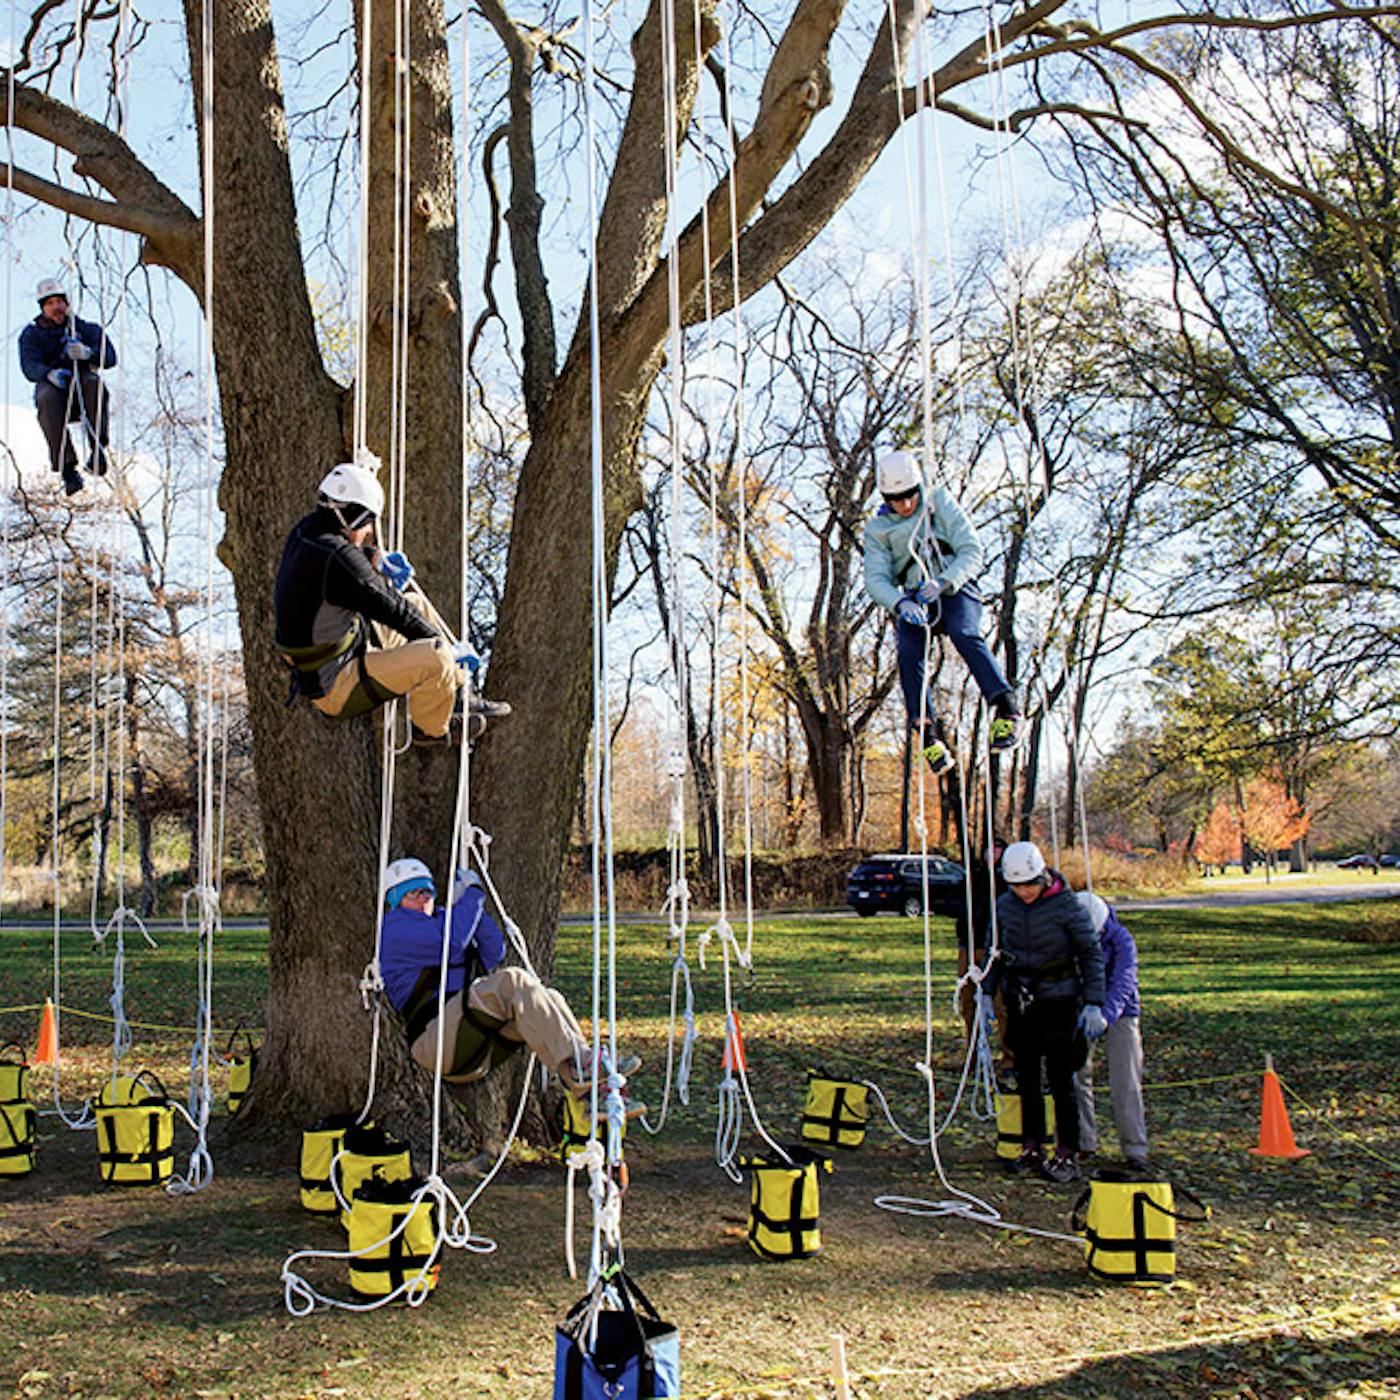 A group tries their hand at tree climbing at Metroparks Toledo)